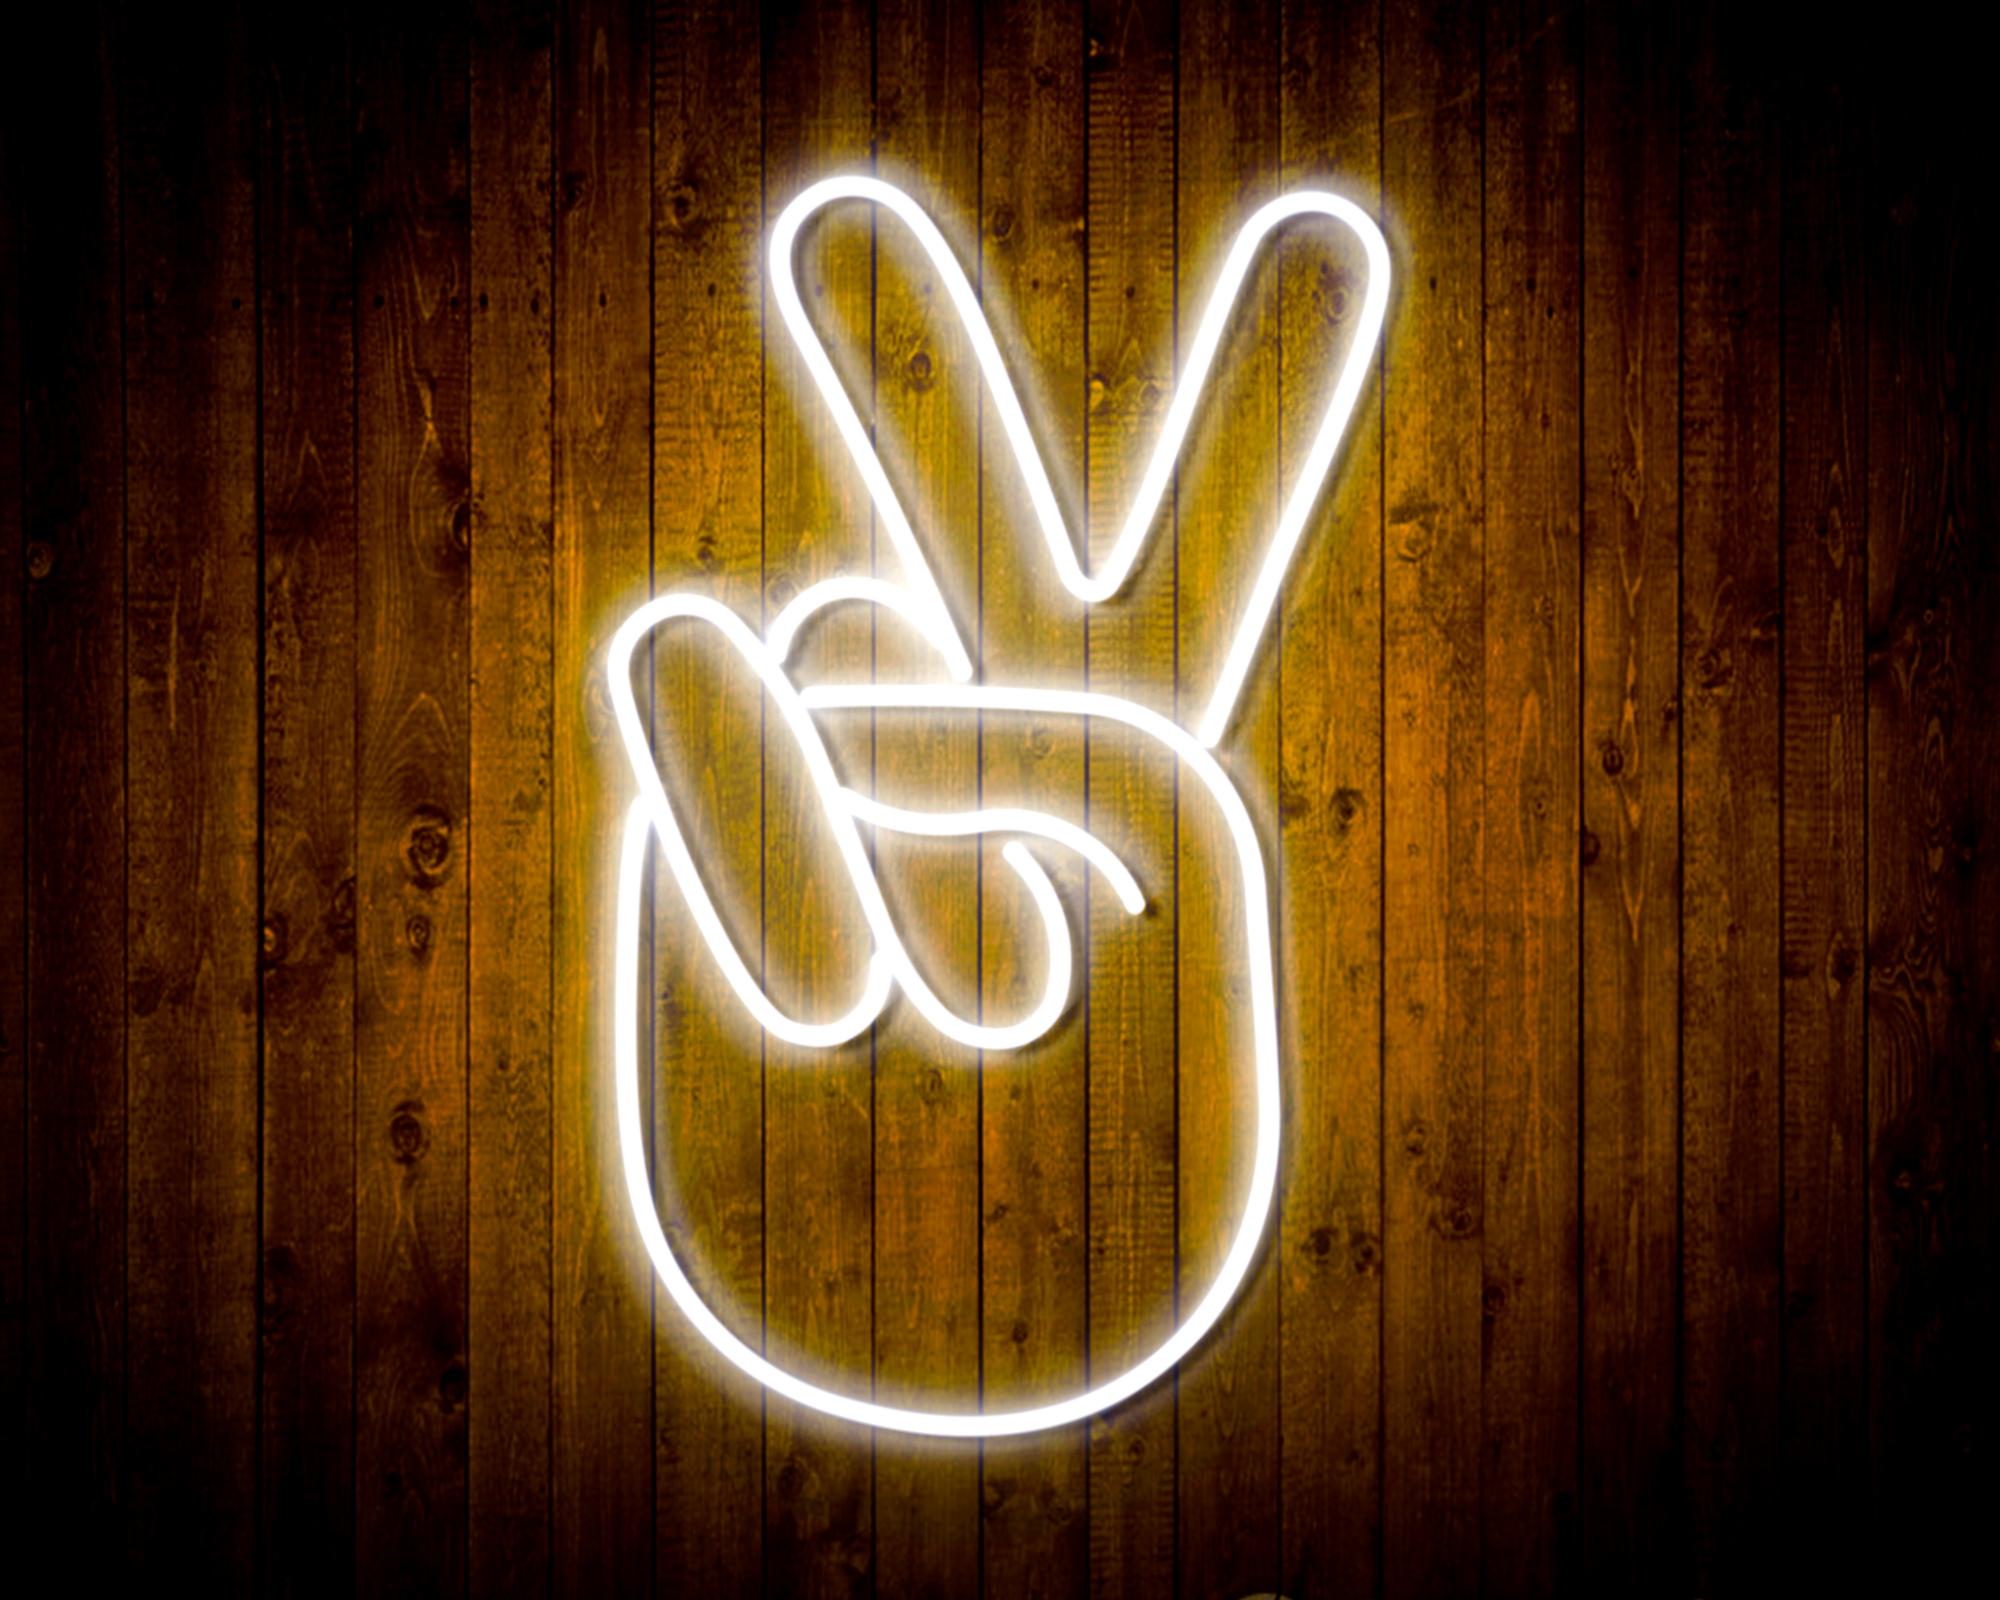 Hand Showing V Sign LED Neon Sign Wall Light